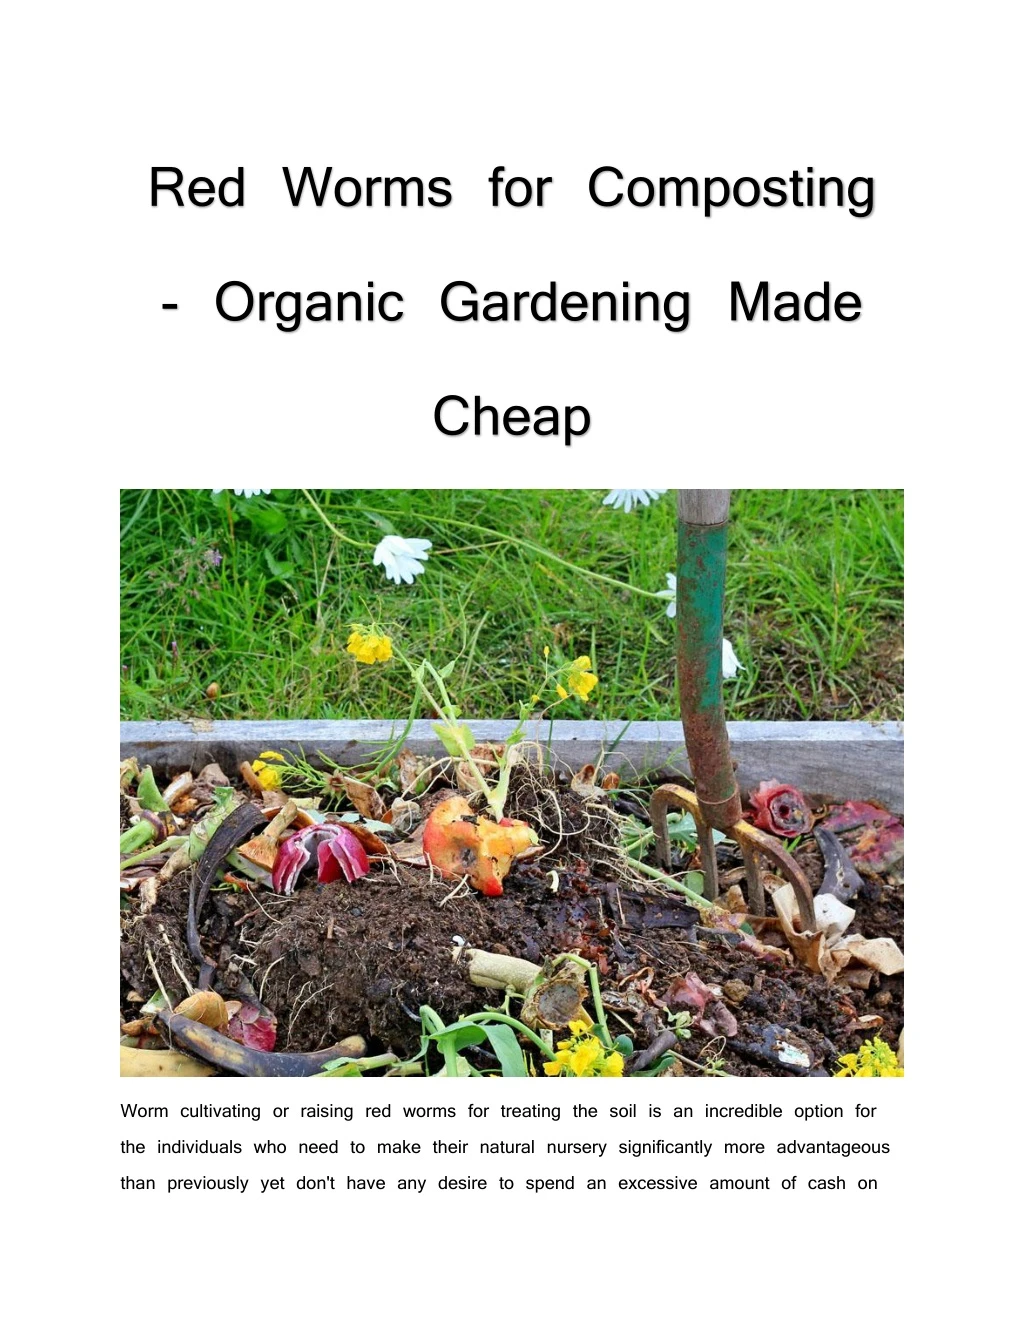 red worms for composting organic gardening made